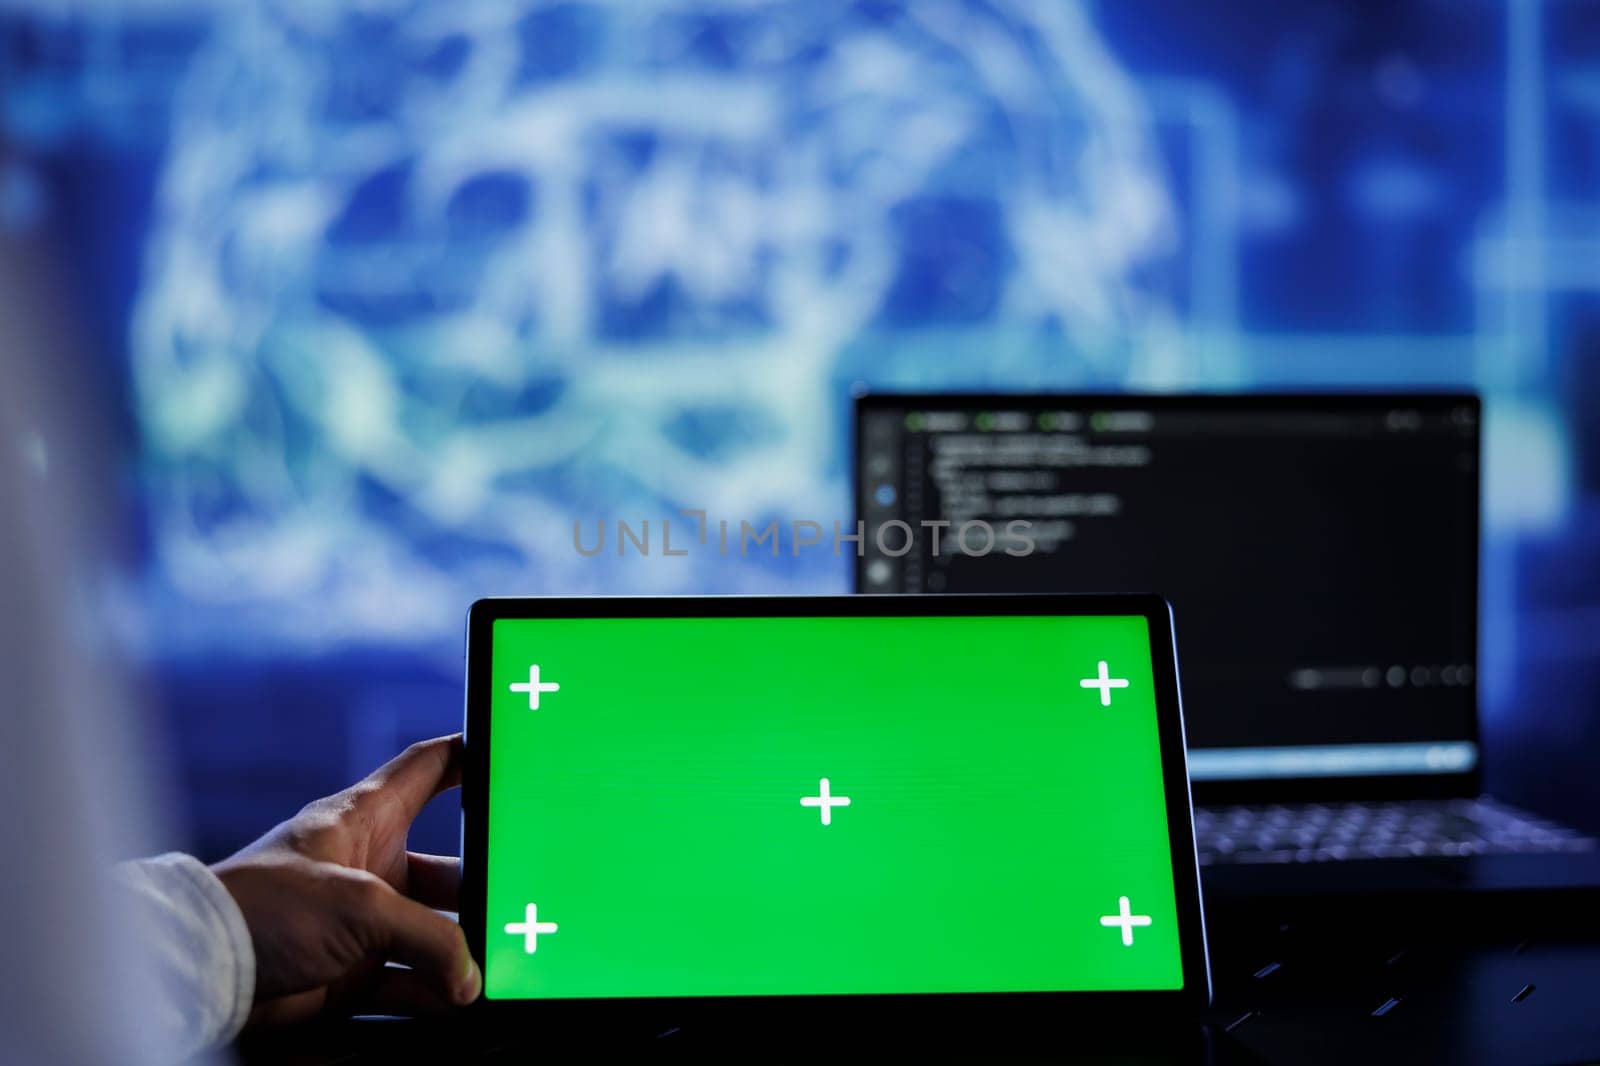 Admin writes code on green screen tablet to visualize artificial intelligence neural networks using augmented reality. High tech workspace supervisor runs AI script on chrome key device